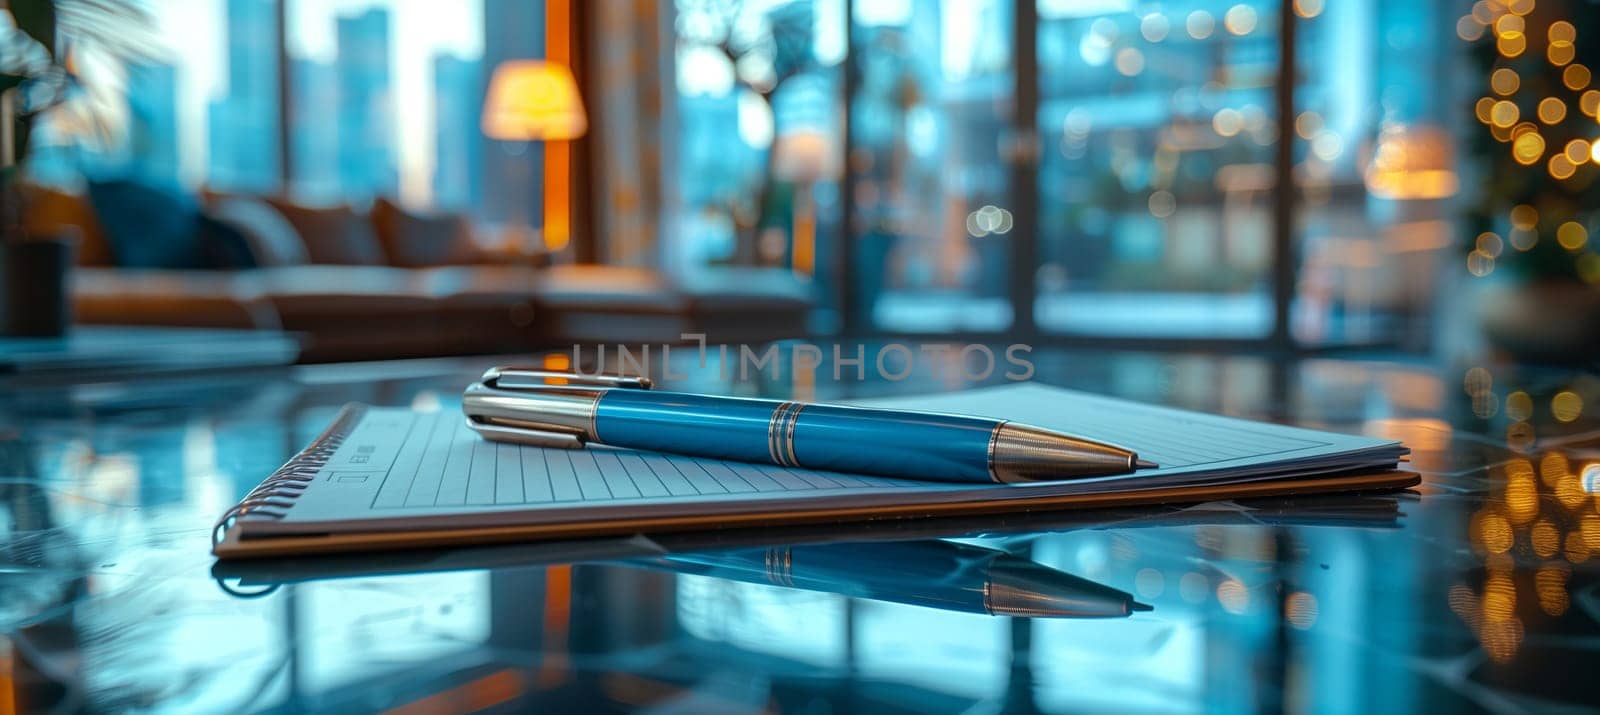 In the room, a pen in electric blue rests on a notebook atop a glass table. Its reflection blends with the tints and shades of the window, creating a tranquil atmosphere